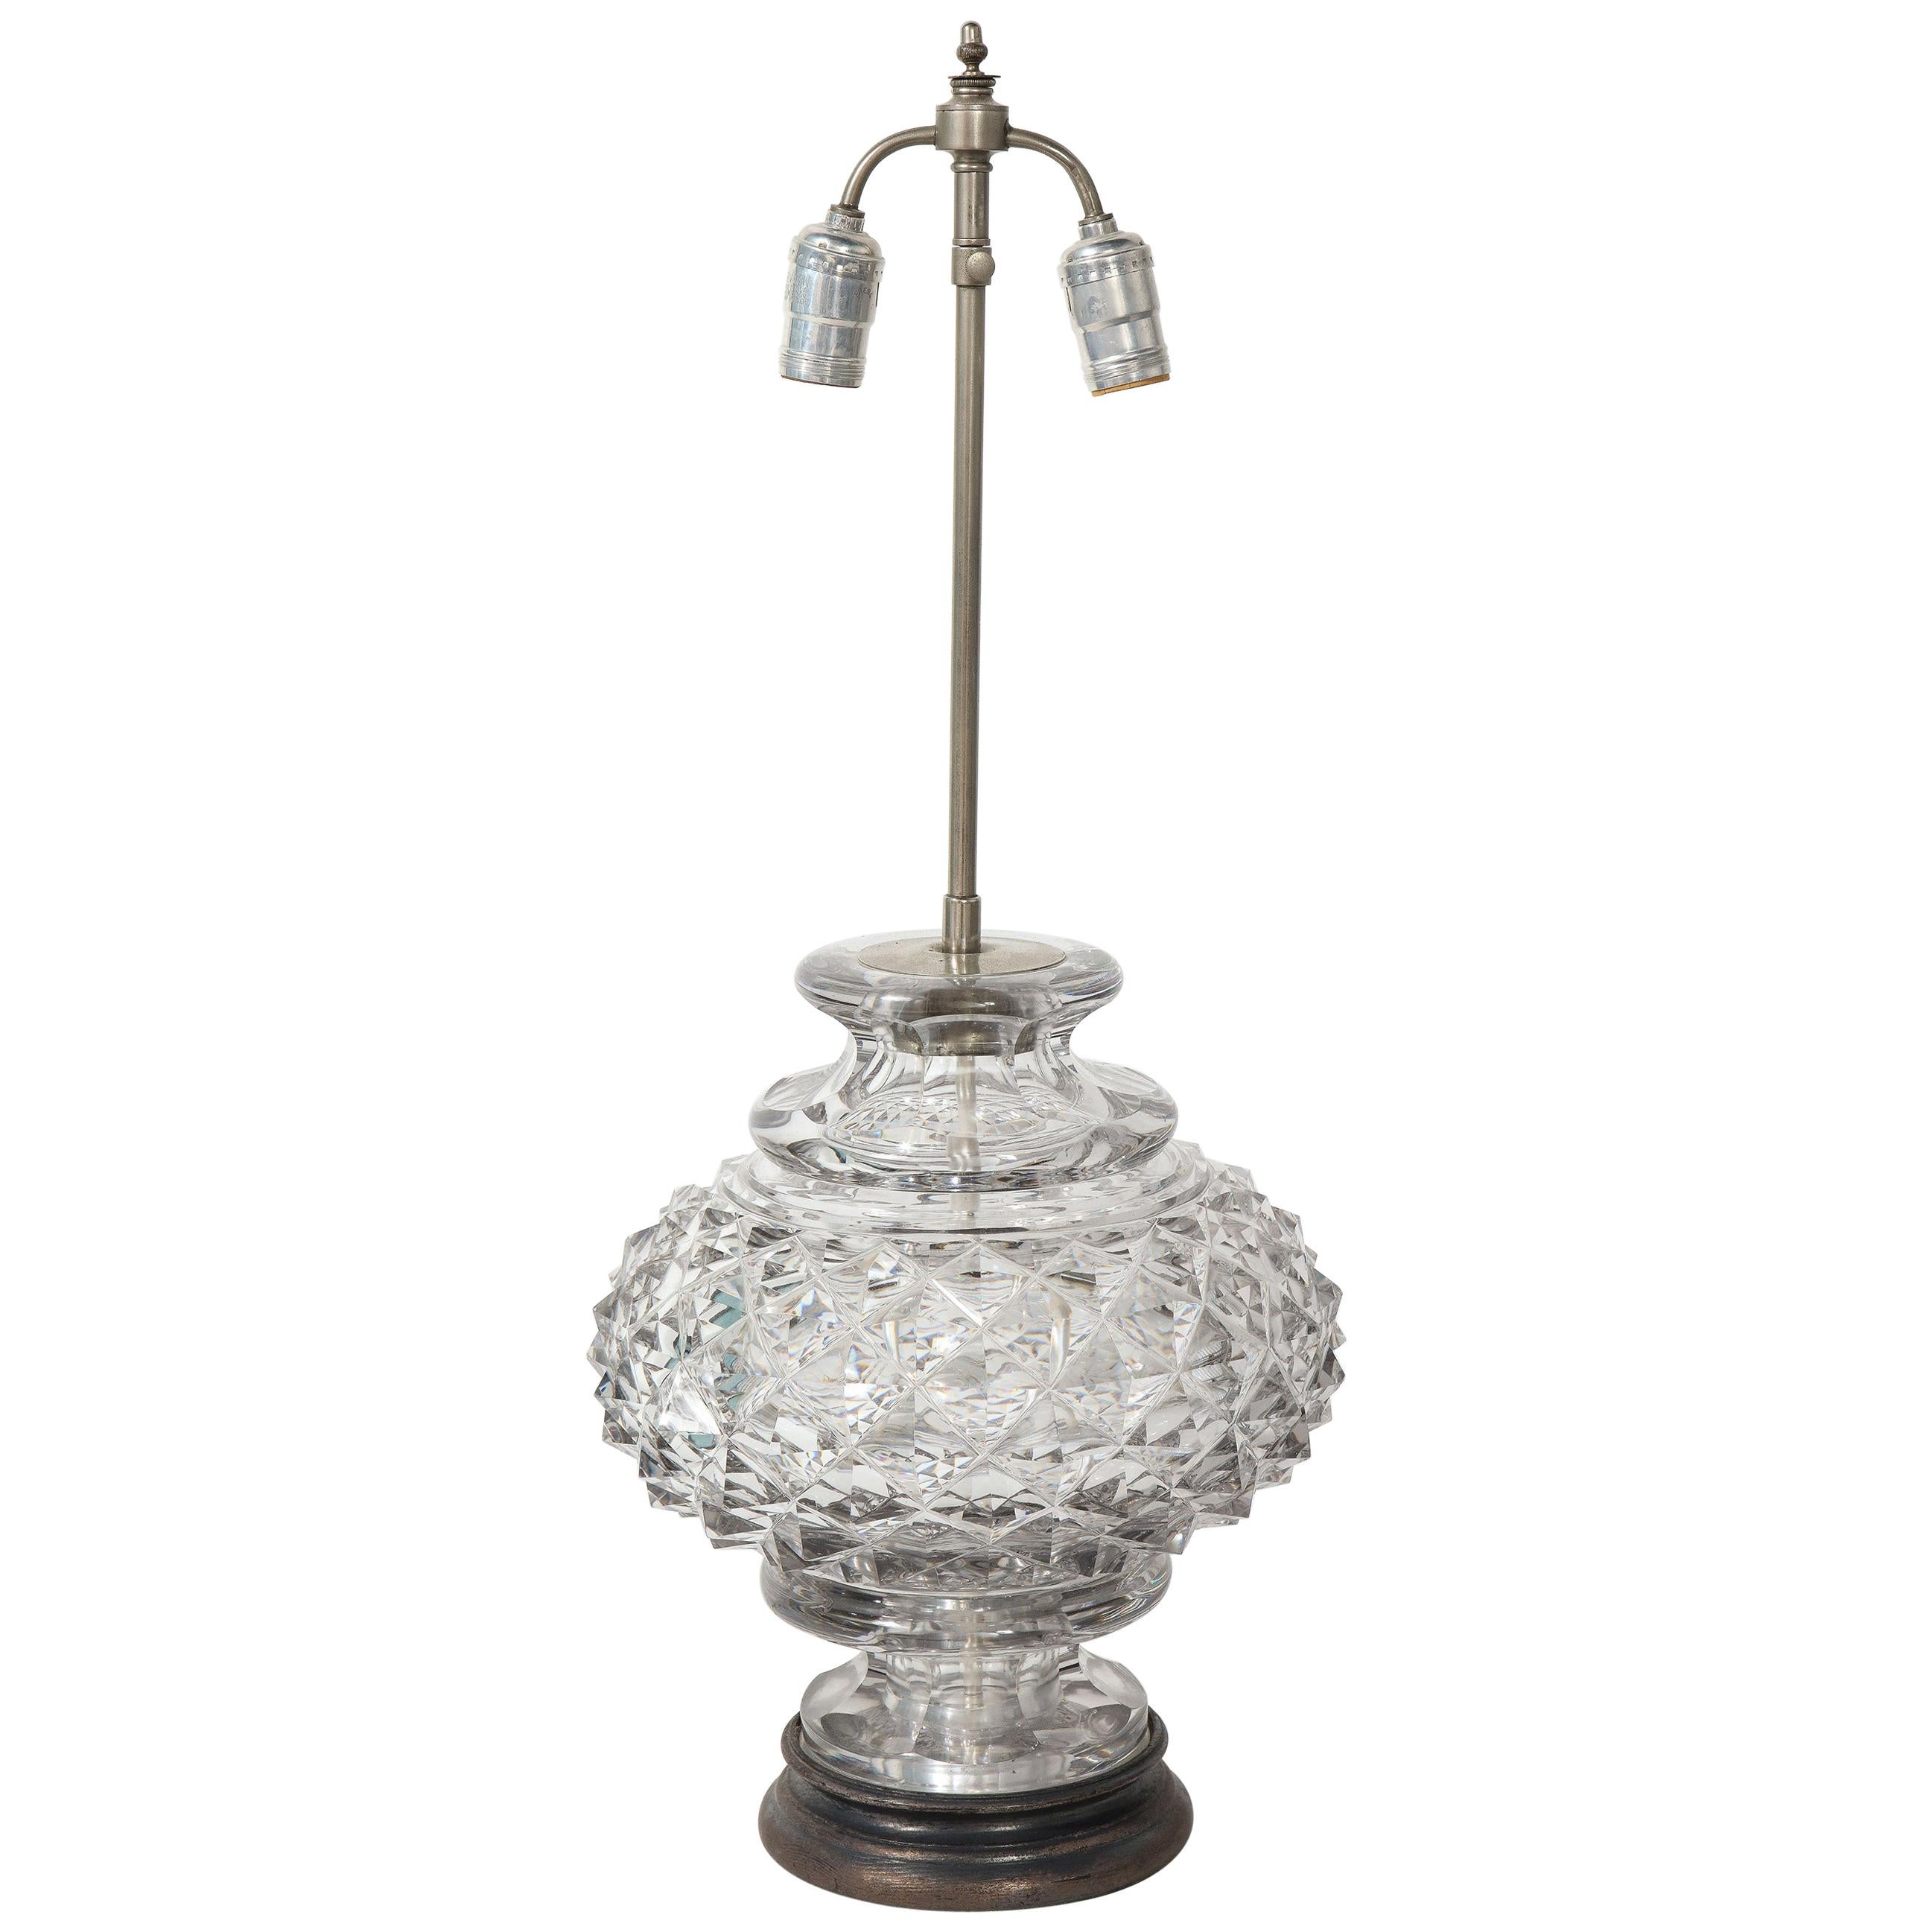 French 19th Century Lead Crystal Lamp